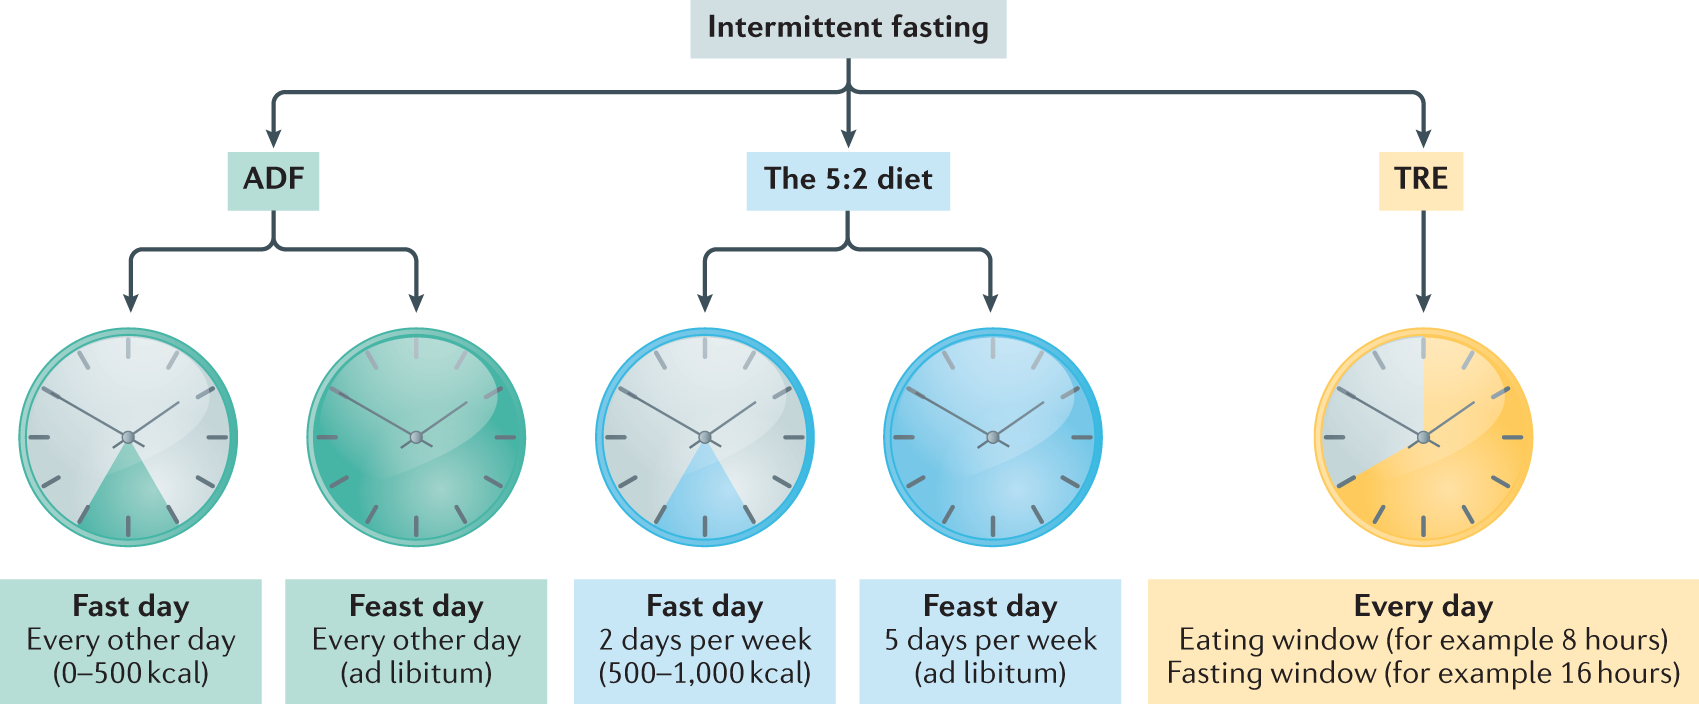 The 5:2 diet: your guide to intermittent fasting